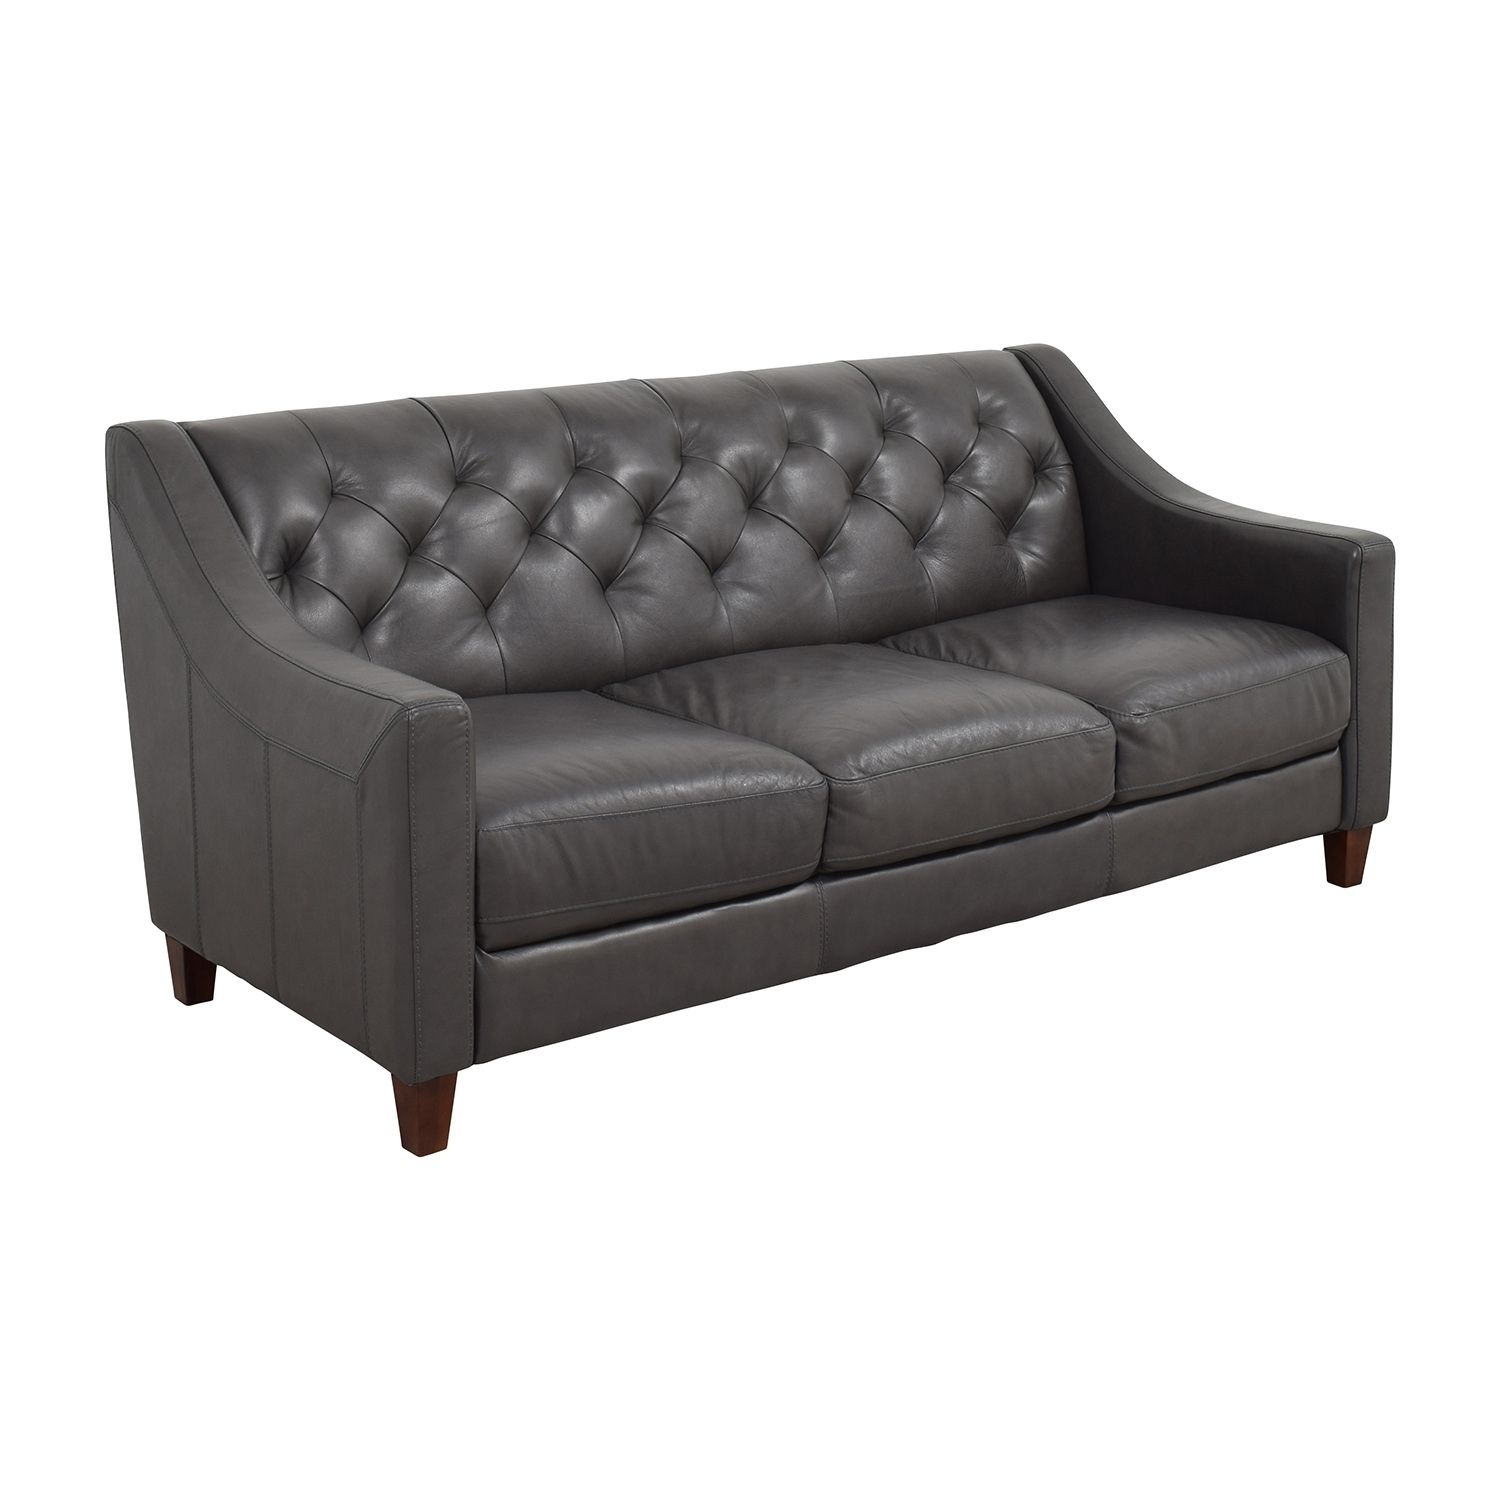 Macys Leather Sofa And Loveseat • Leather Sofa Pertaining To Macys Leather Sofas (View 3 of 10)